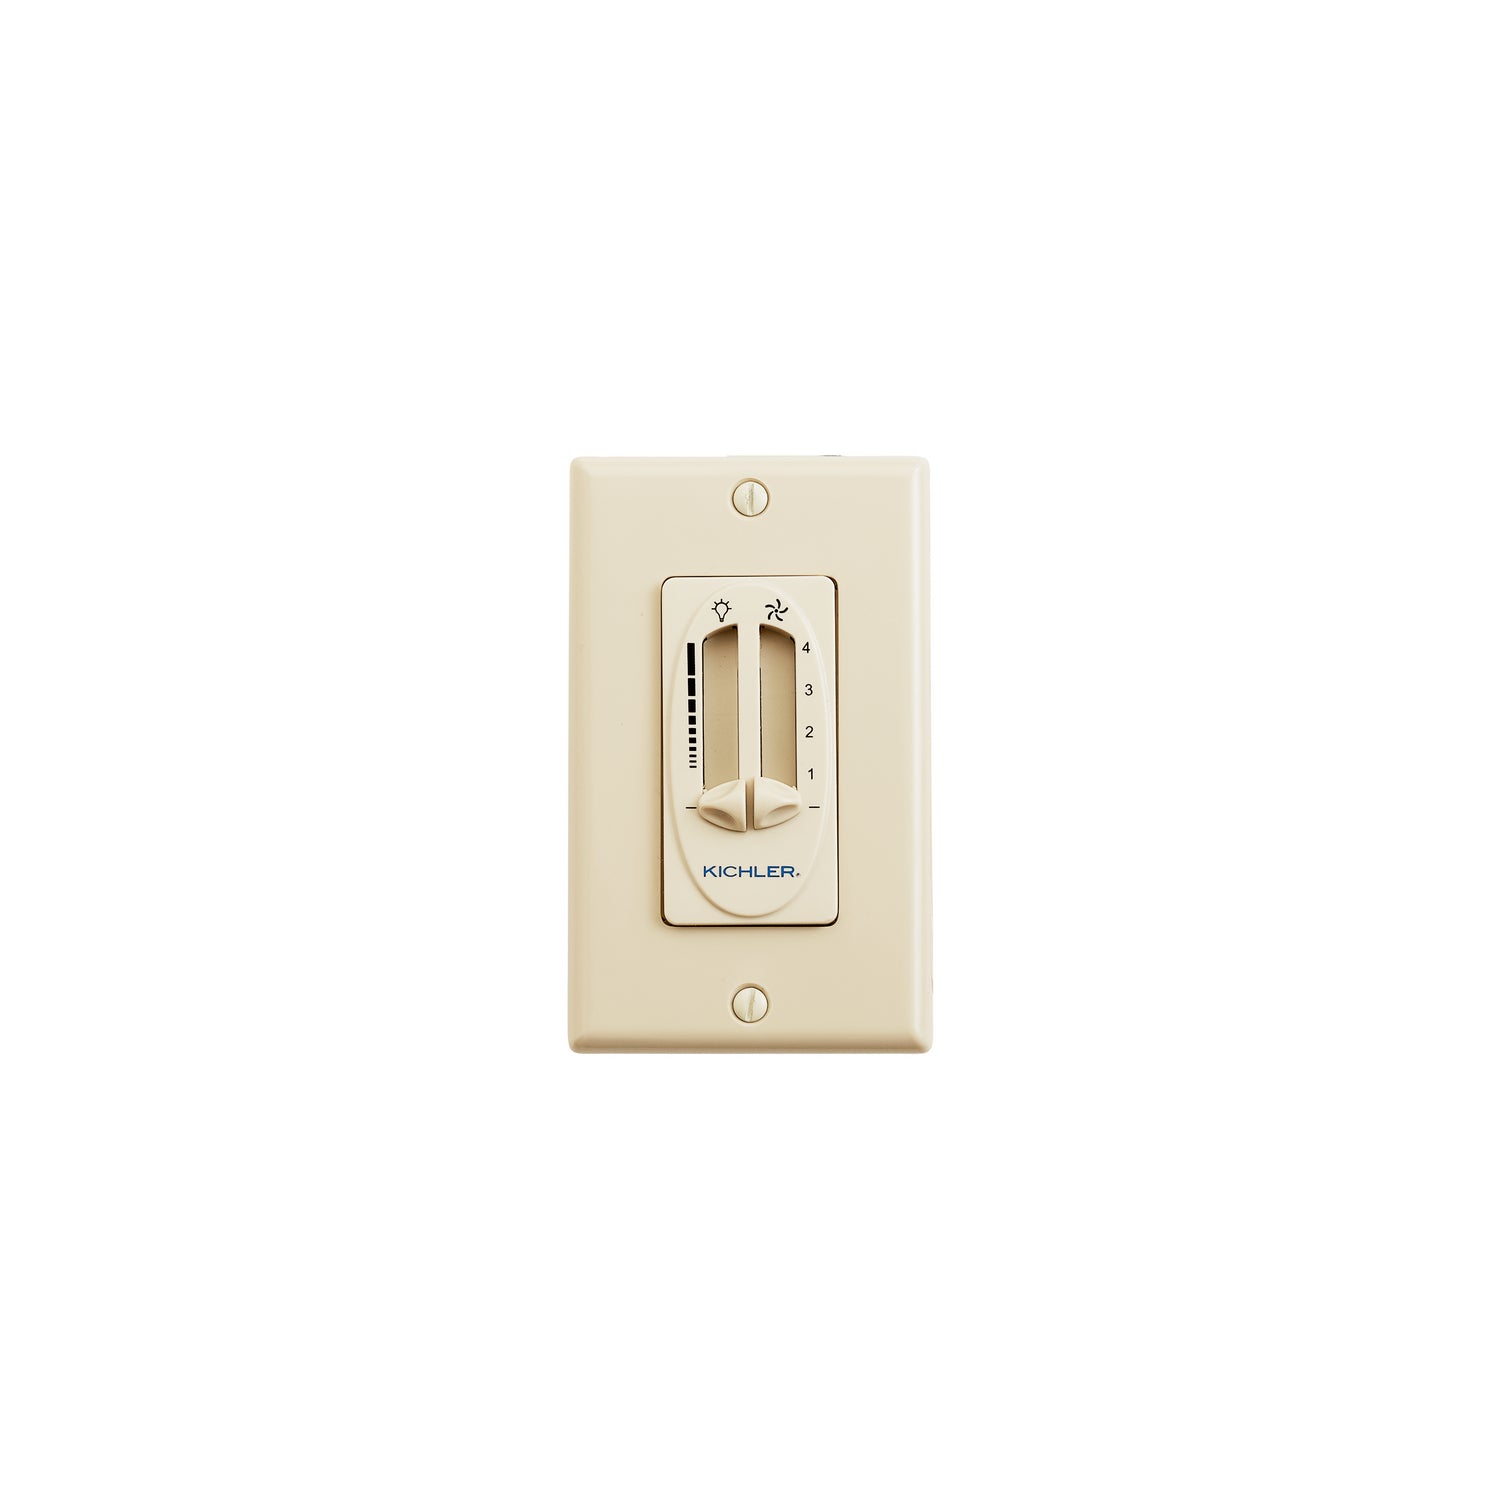 Kichler Canada - Fan 4 Speed-Light Dimmer - Accessory - Ivory (Not Painted)- Union Lighting Luminaires Decor